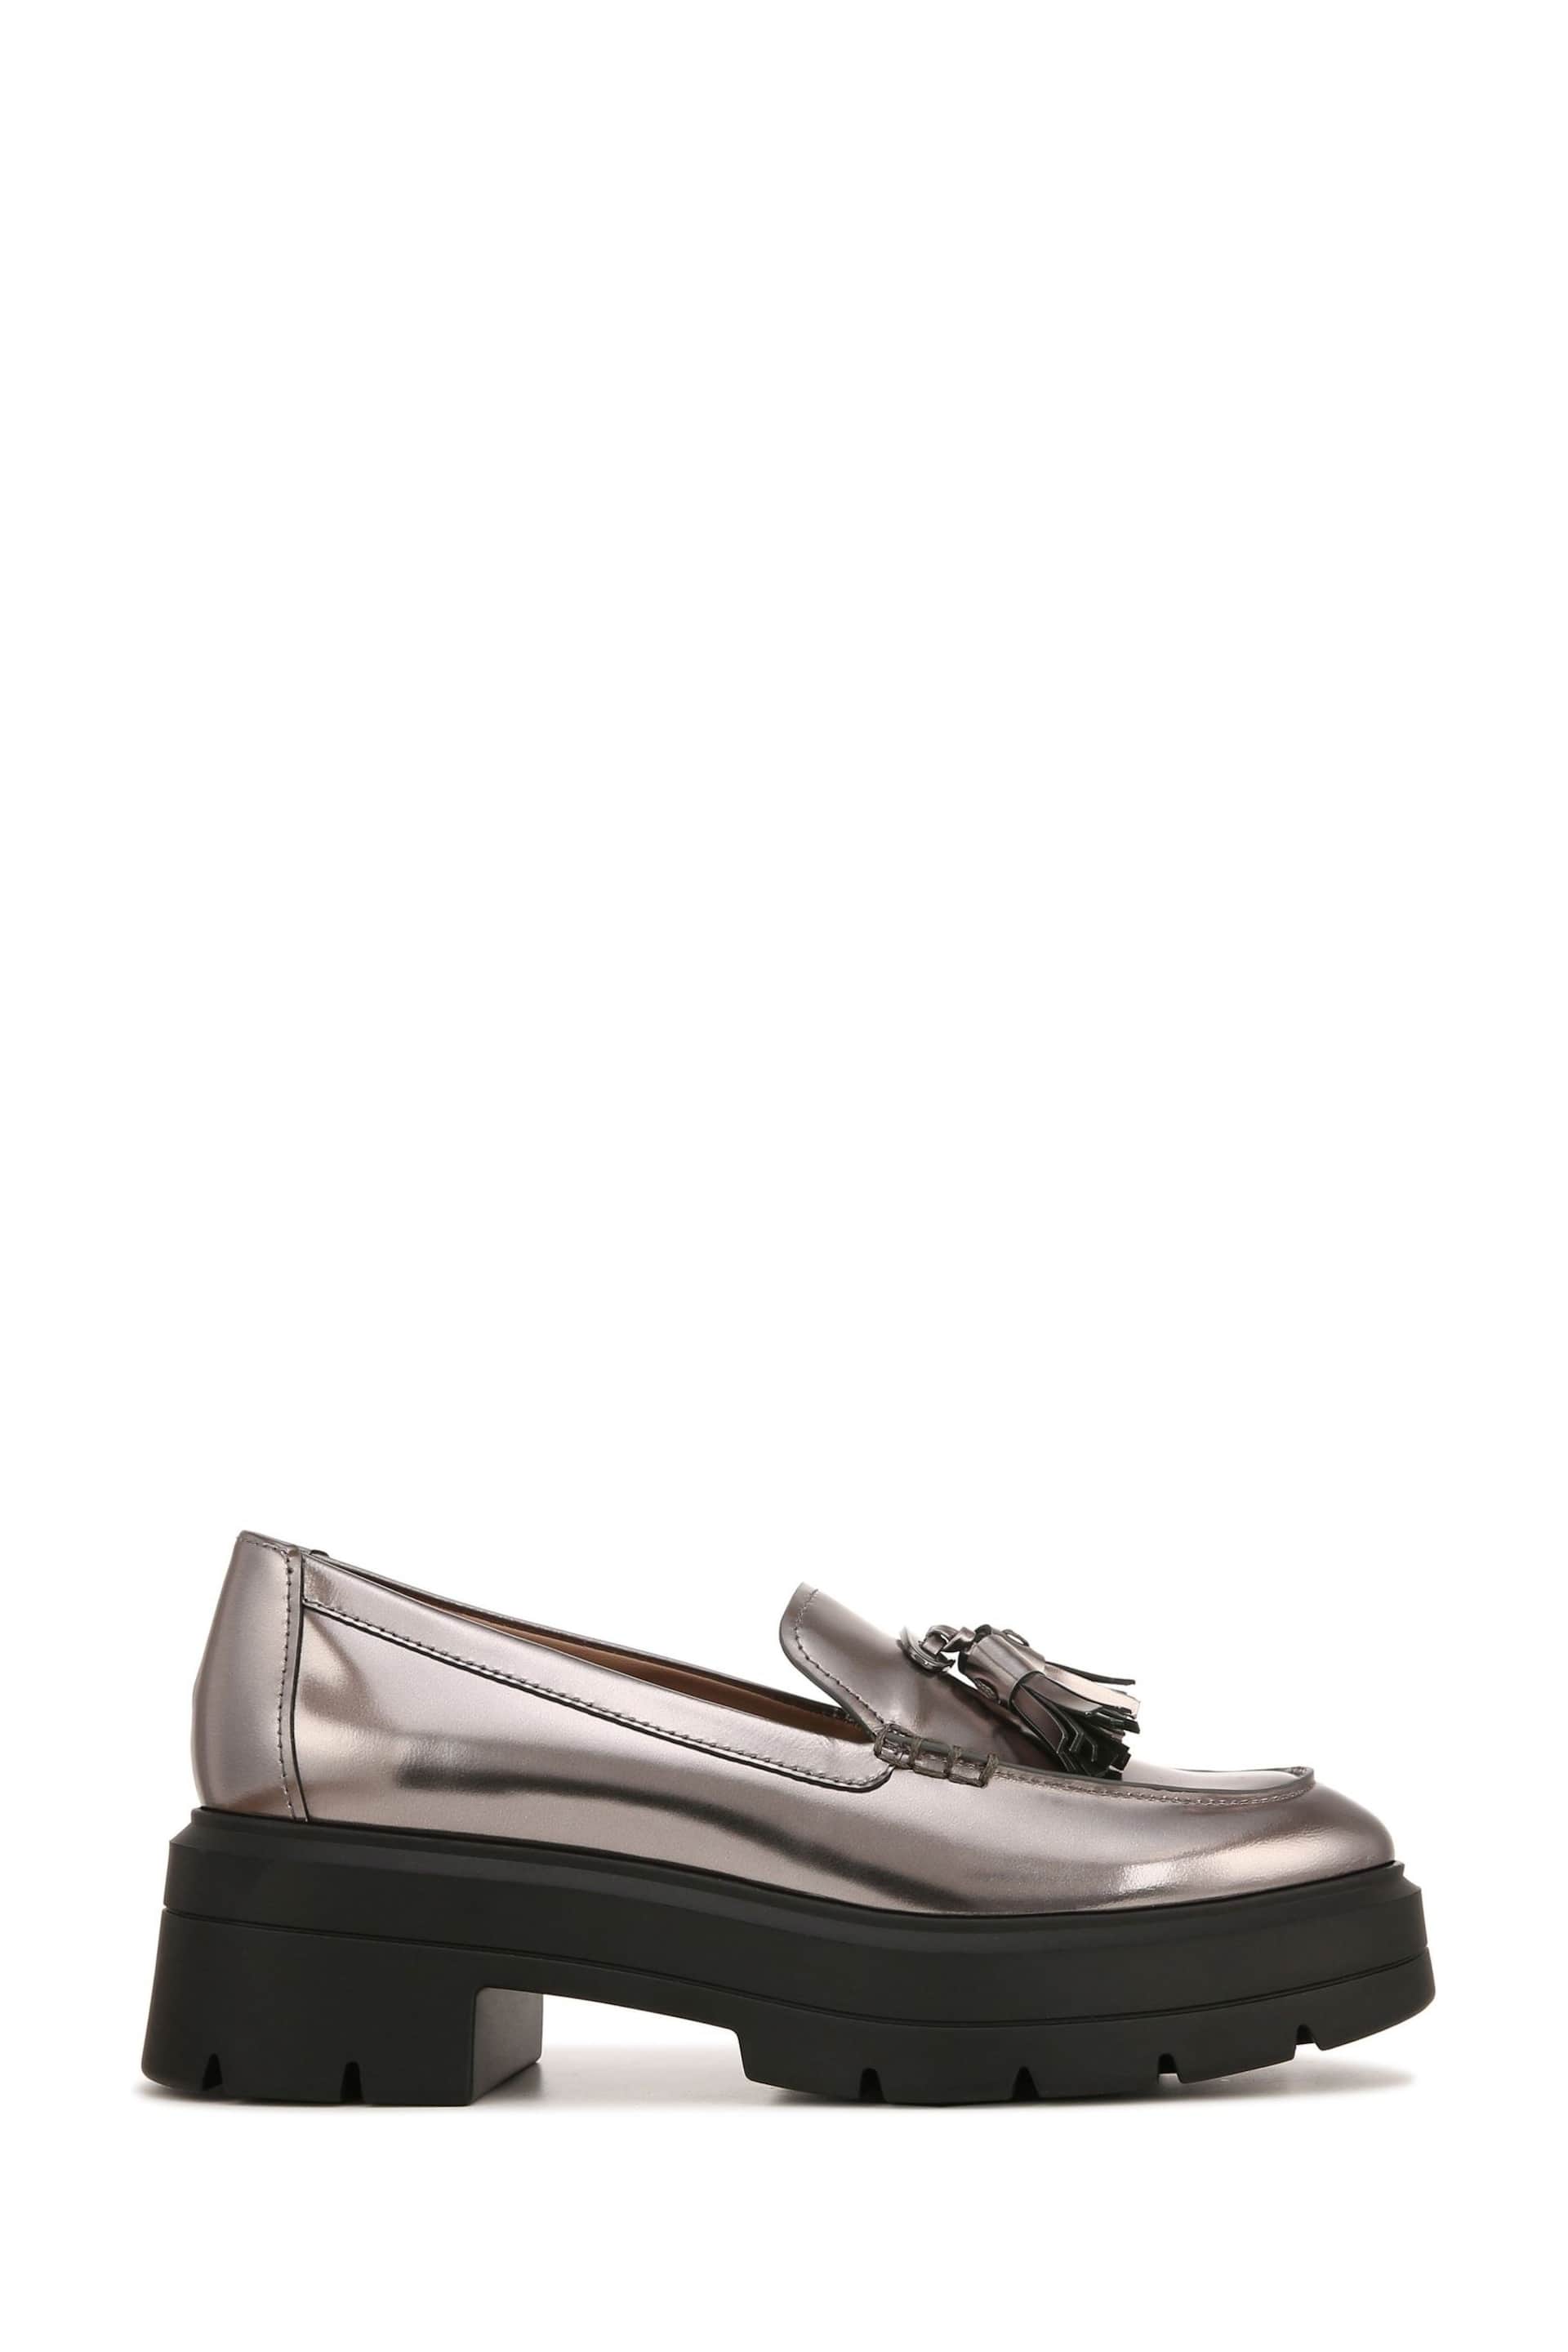 Naturalizer Nieves Slip-on Loafers - Image 1 of 7